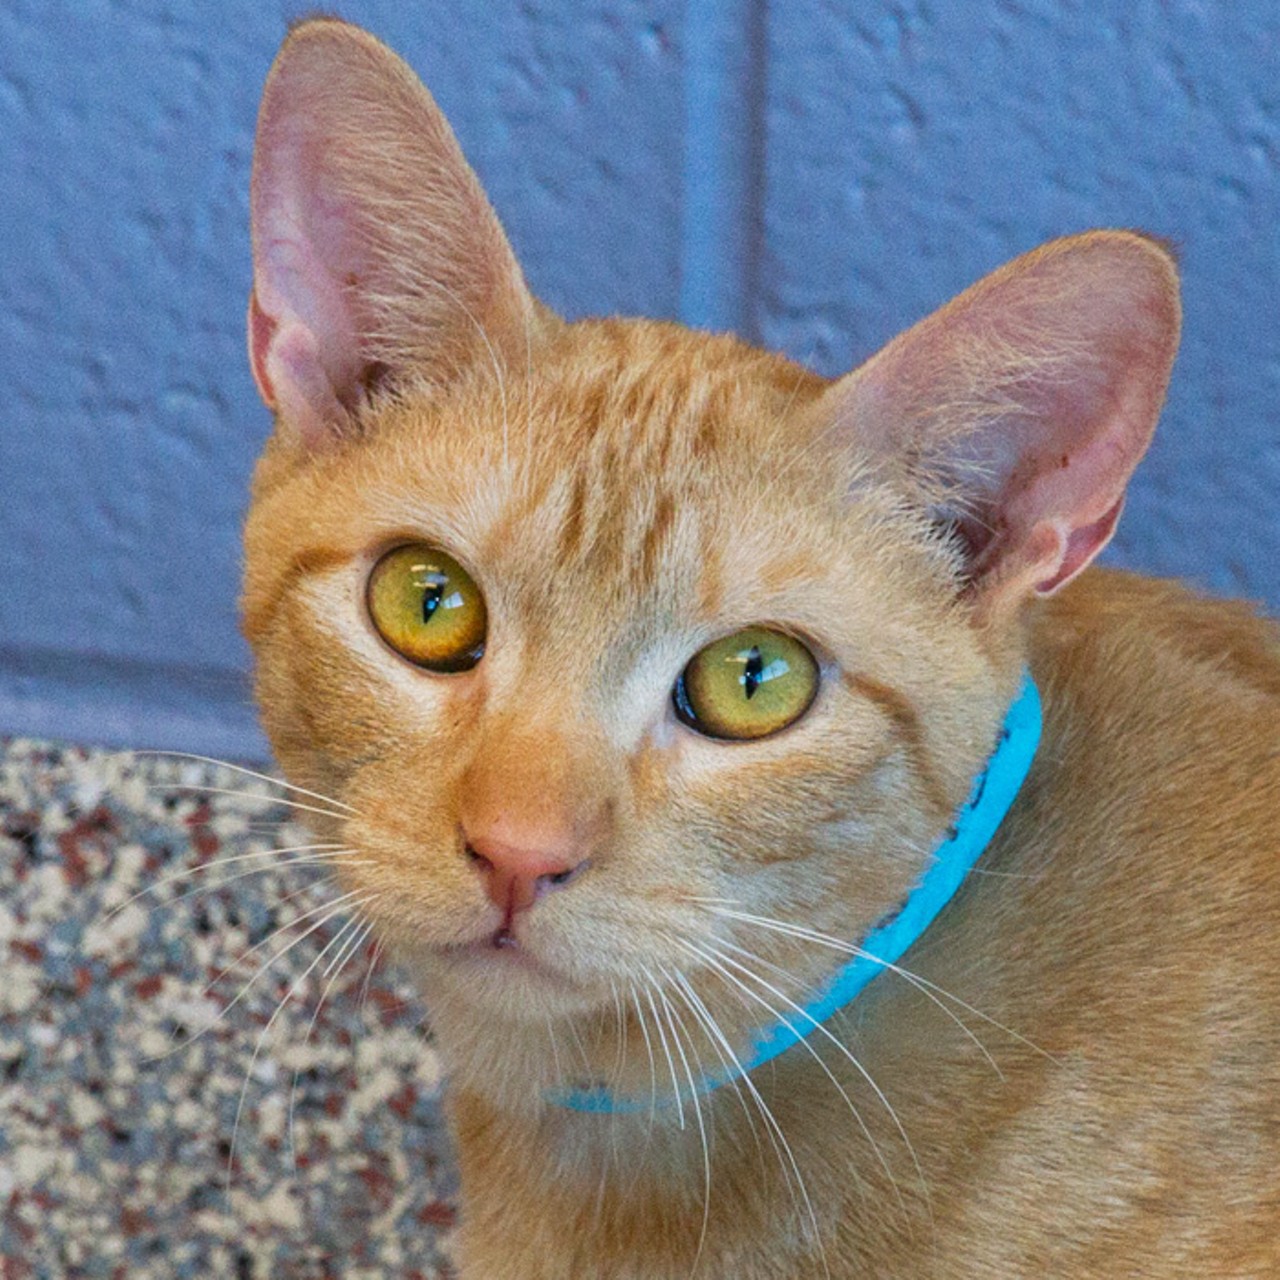 NAME: Ambros
GENDER: Male
BREED: Domestic Short Hair
AGE: 1 year
WEIGHT: 8 pounds
SPECIAL CONSIDERATIONS: None
REASON I CAME TO MHS: Agency transfer
LOCATION: Berman Center for Animal Care in Westland
ID NUMBER: 865892